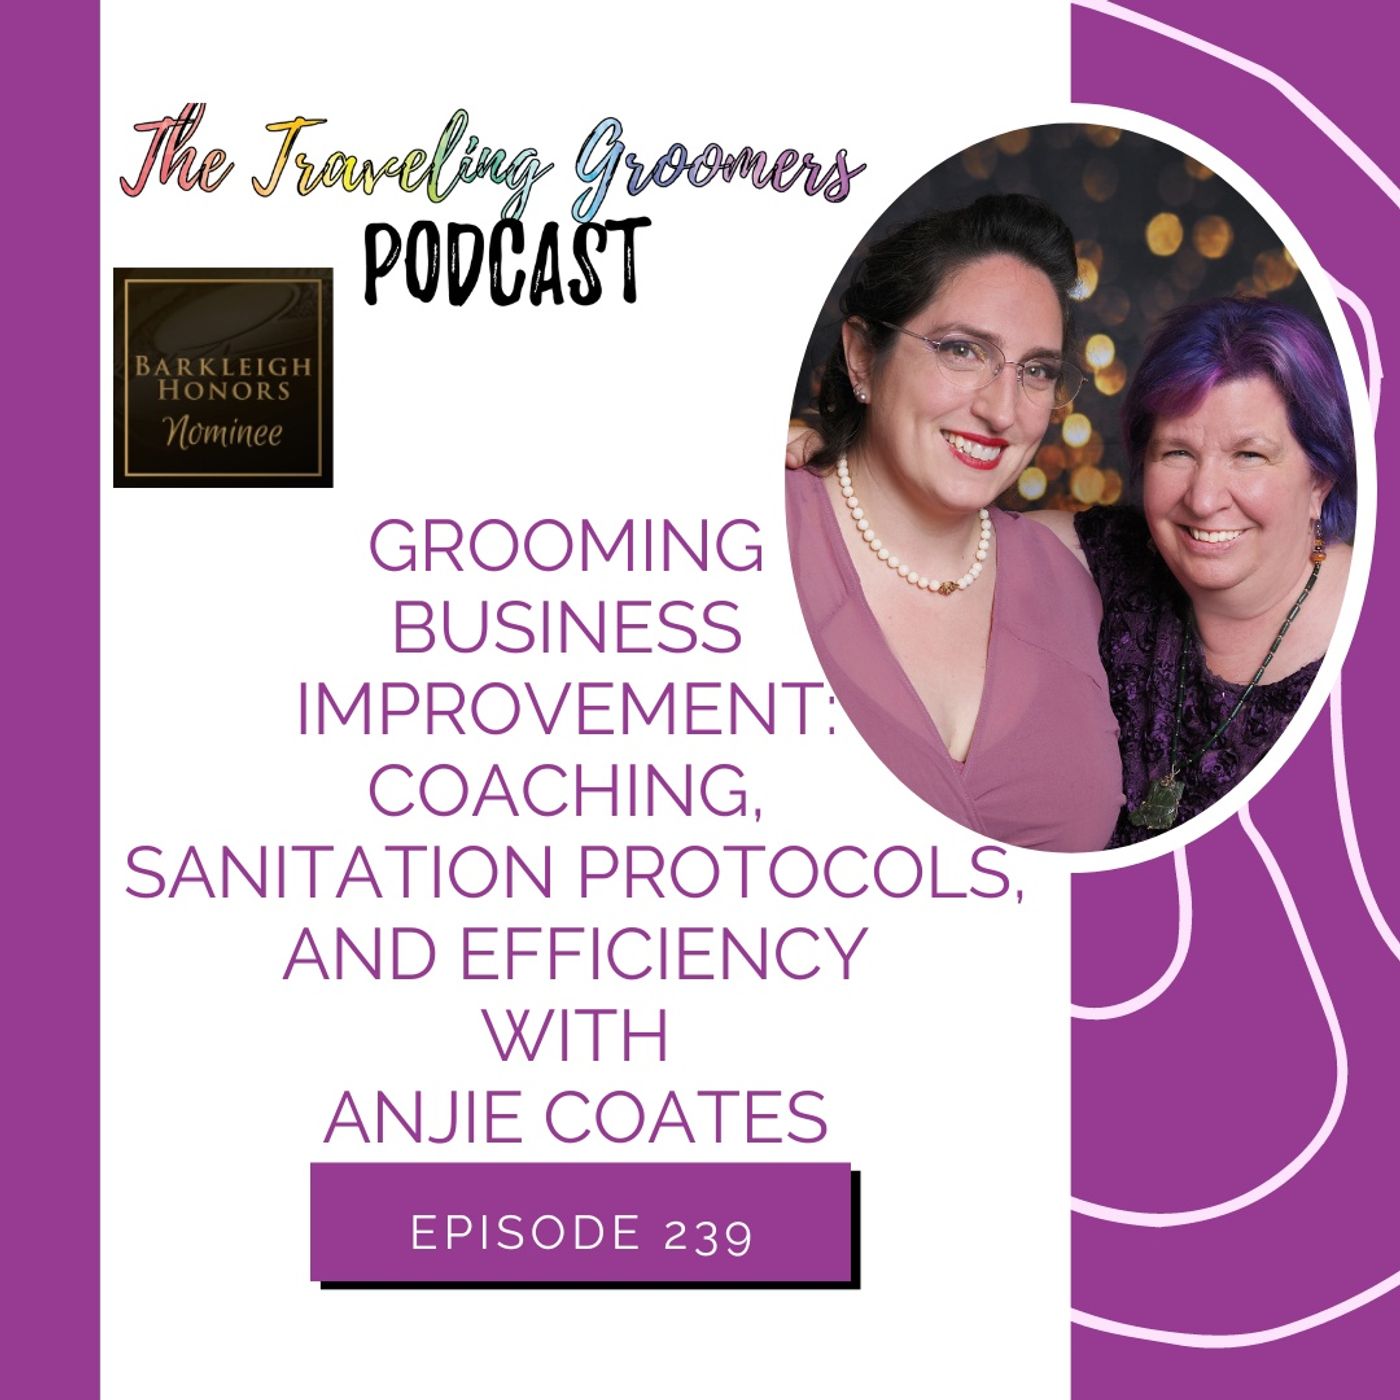 Grooming Business Improvement_ Coaching, Sanitation Protocols, and Efficiency With Anjie Coates